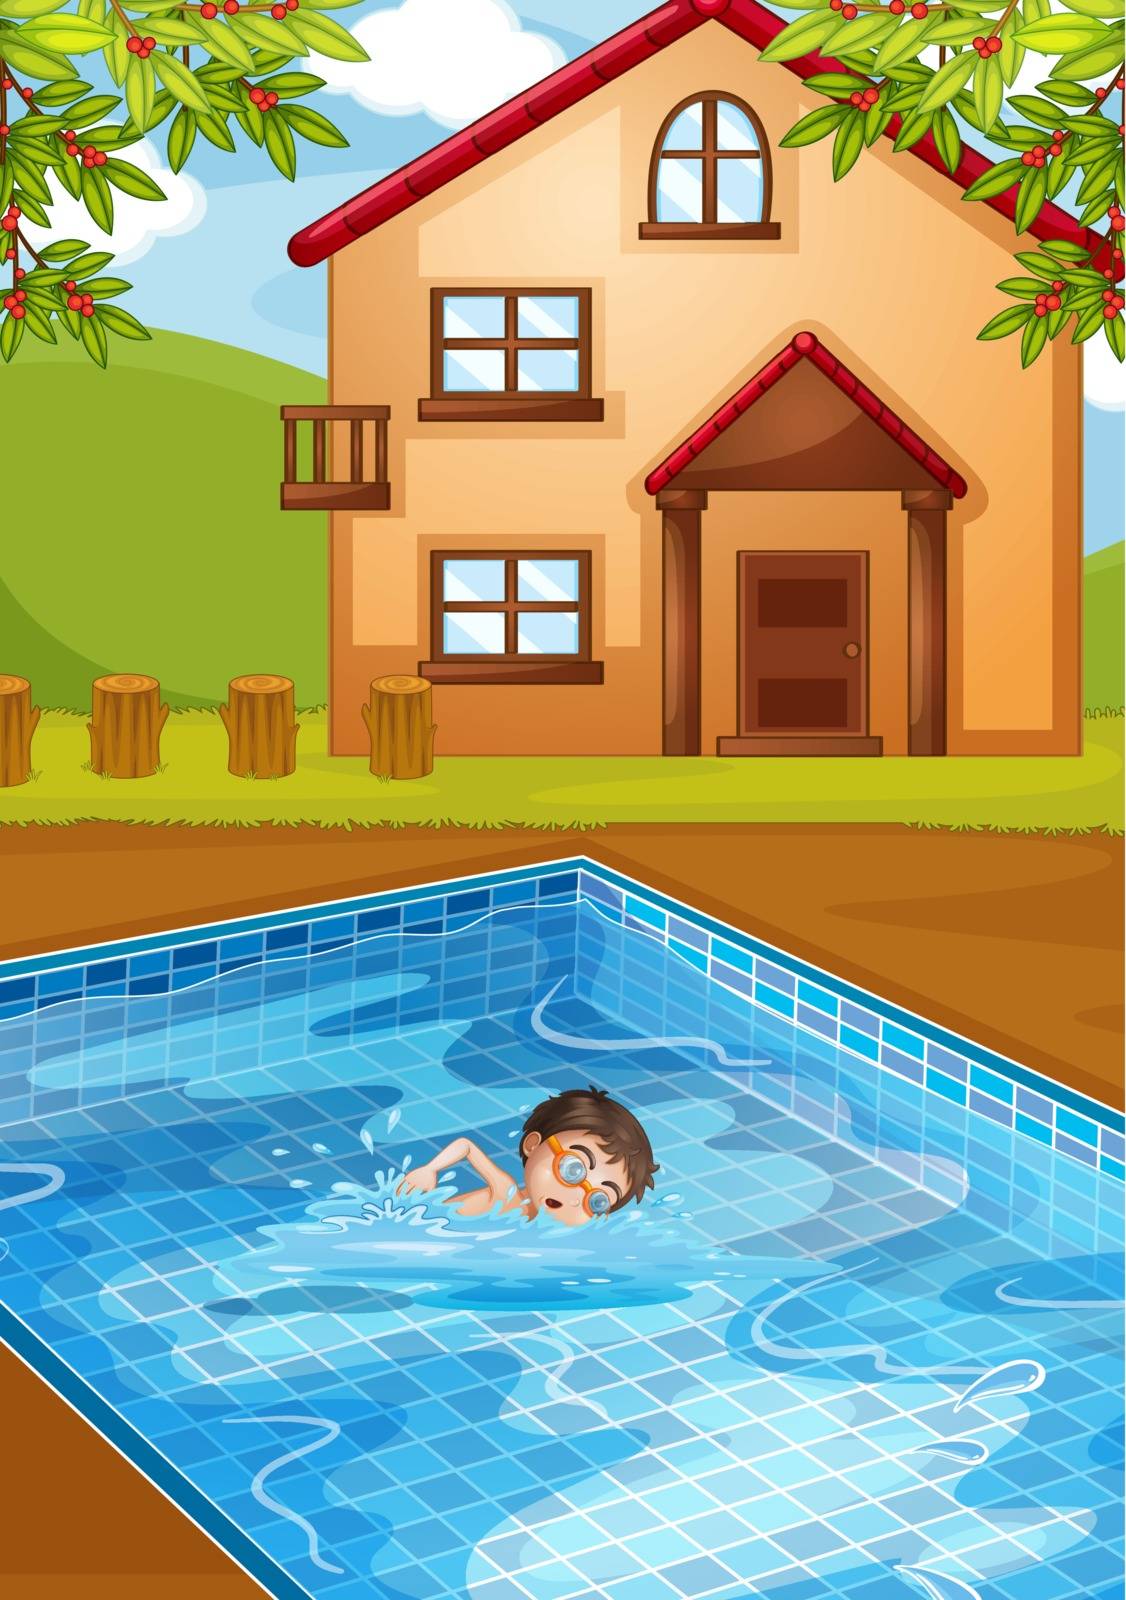 Illustration of a kid swimming at the pool